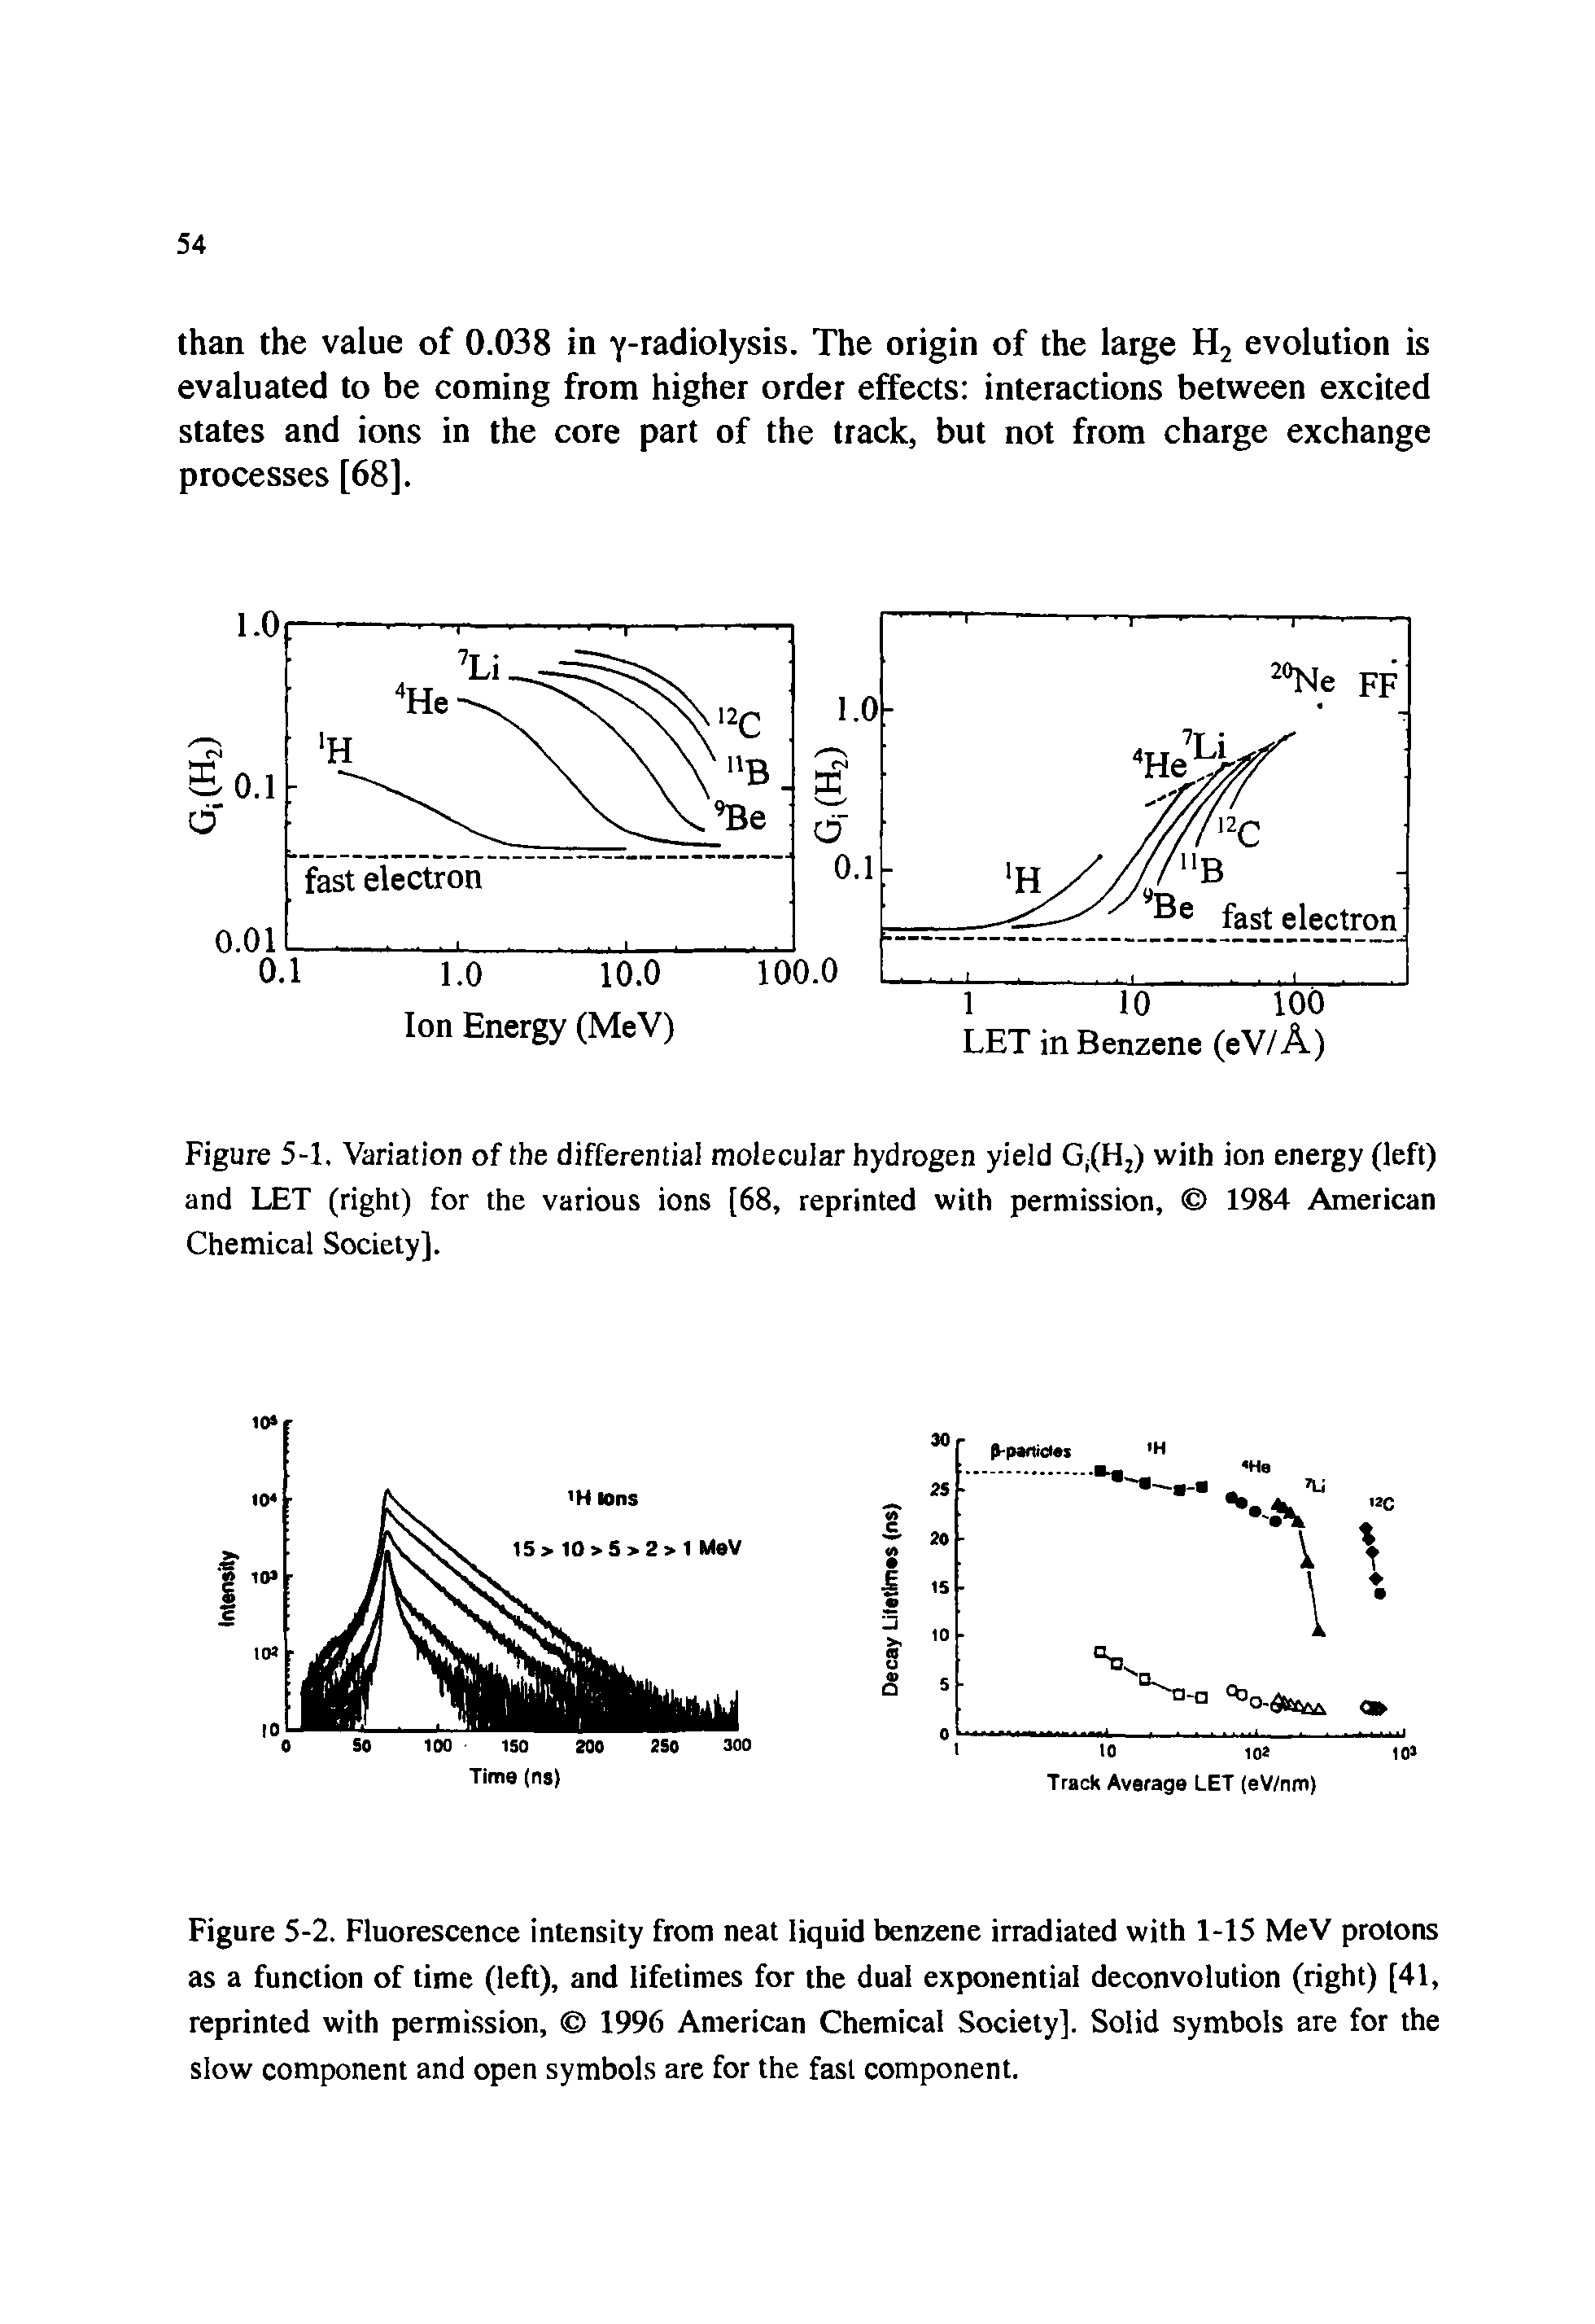 Figure 5-2. Fluorescence intensity from neat liquid benzene irradiated with 1-15 MeV protons as a function of time (left), and lifetimes for the dual exponential deconvolution (right) [41, reprinted with permission, 1996 American Chemical Society]. Solid symbols are for the slow component and open symbols are for the fast component.